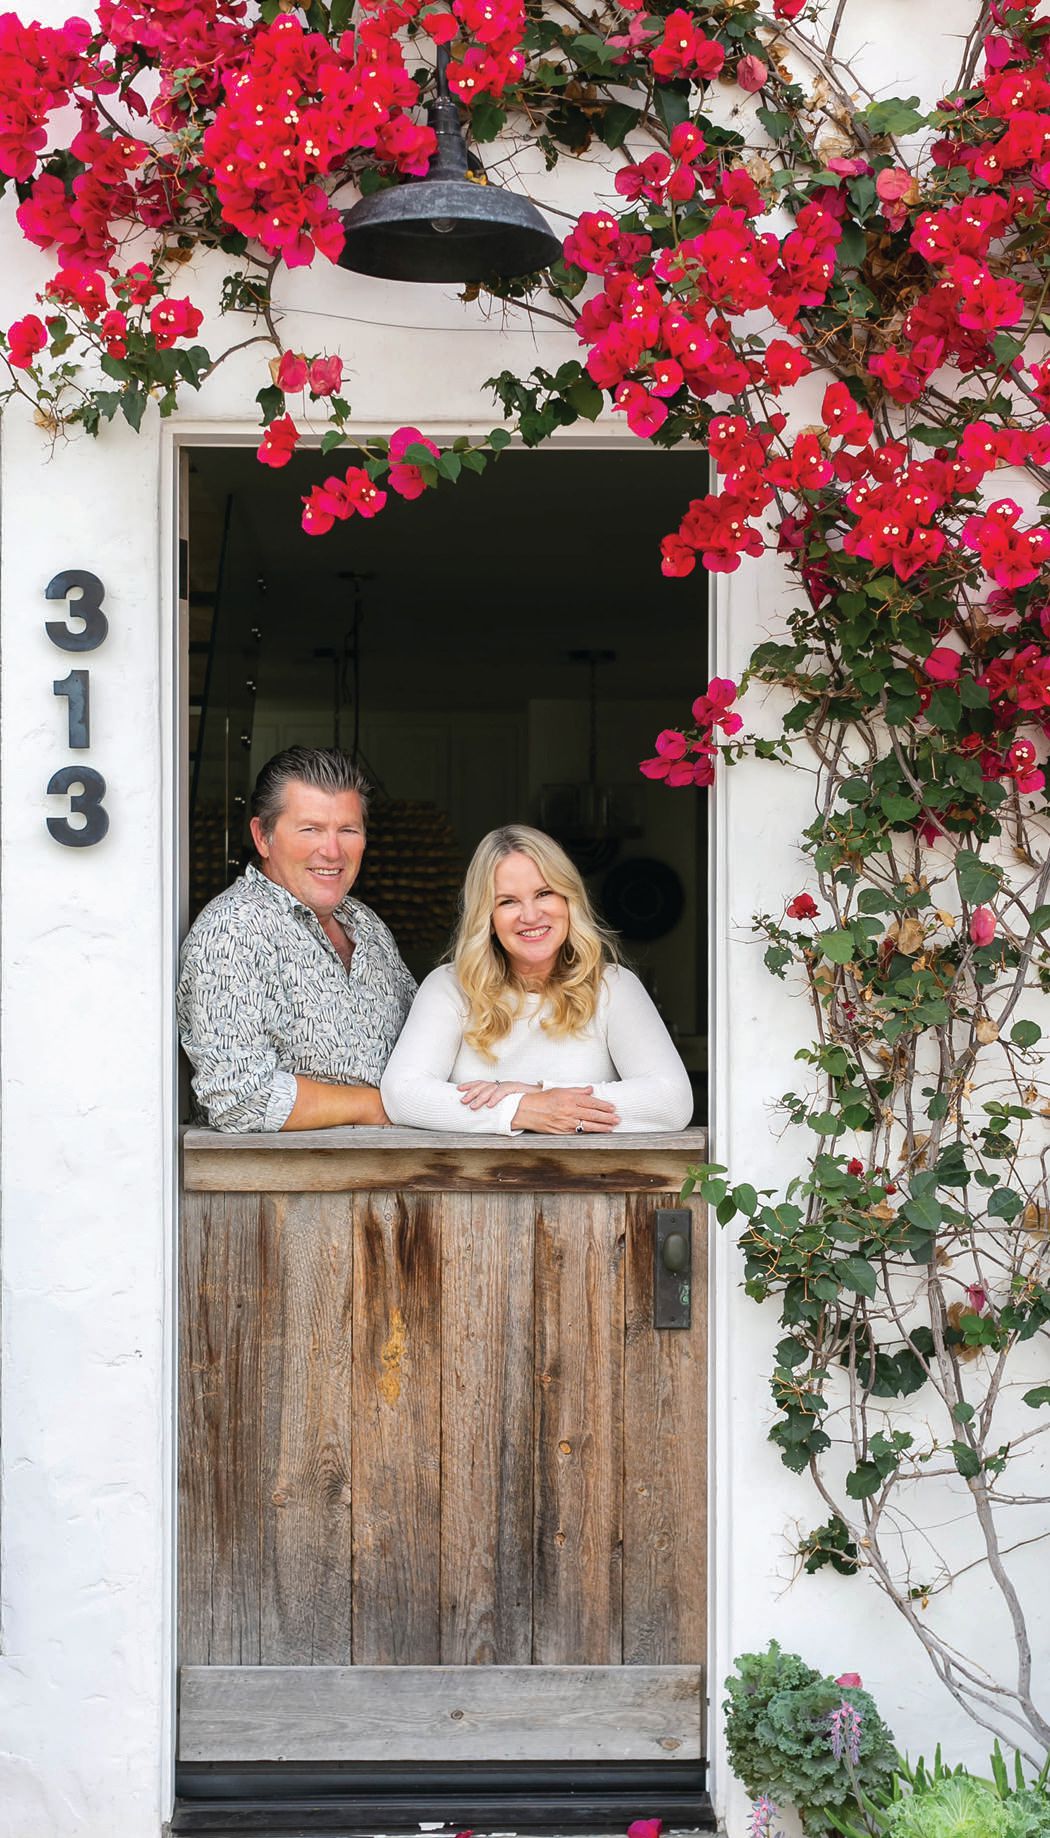 Wendy and Greg Blackband added white stucco, a Dutch door and bougainvillea vines to their home’s exterior. PHOTOGRAPHED BY RYAN GARVIN